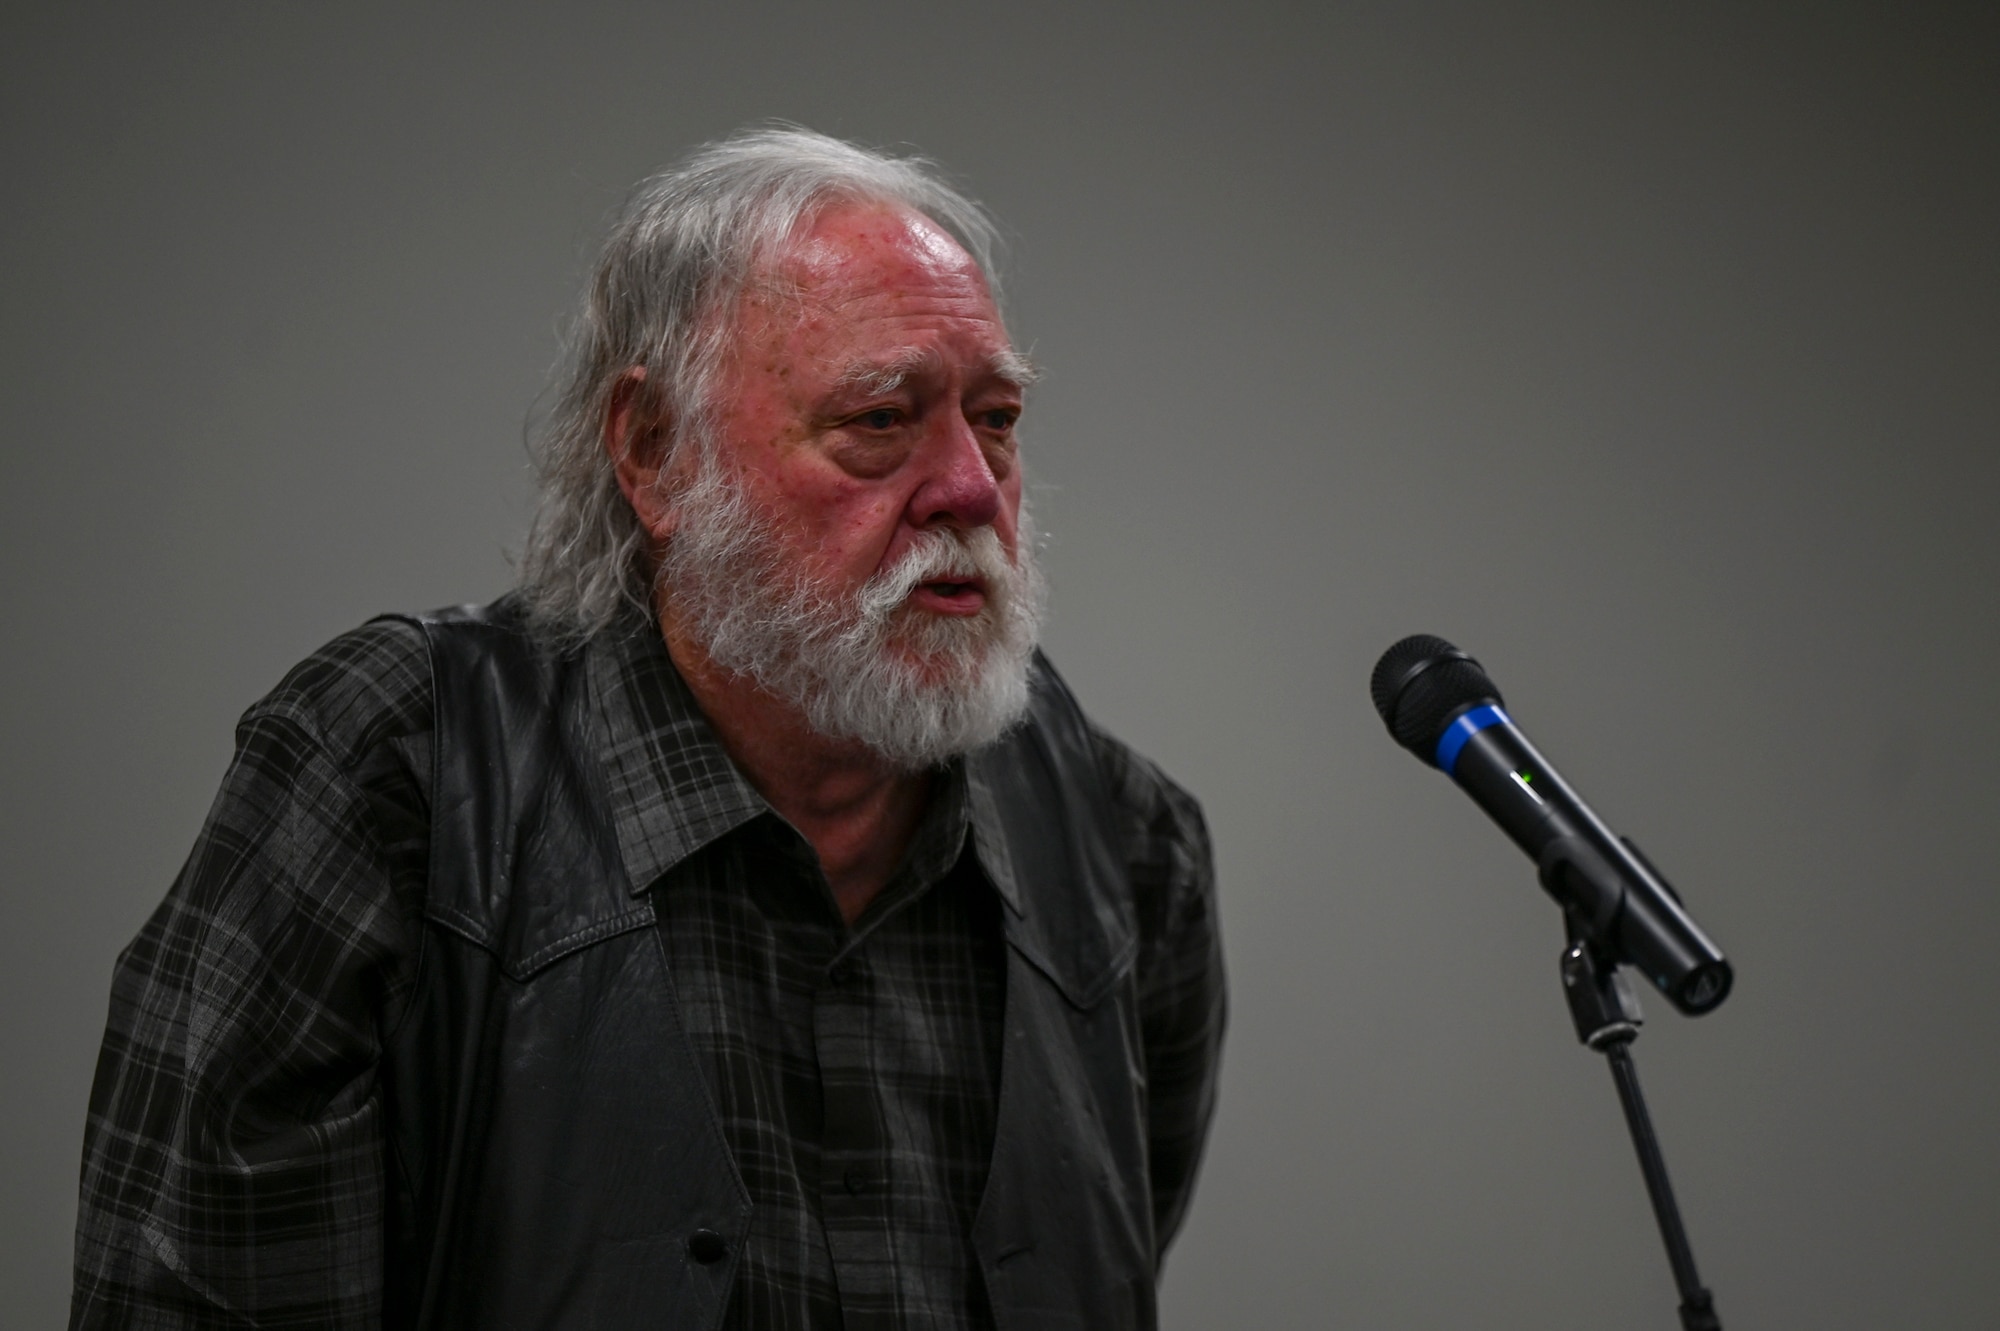 A man speaking at a microphone